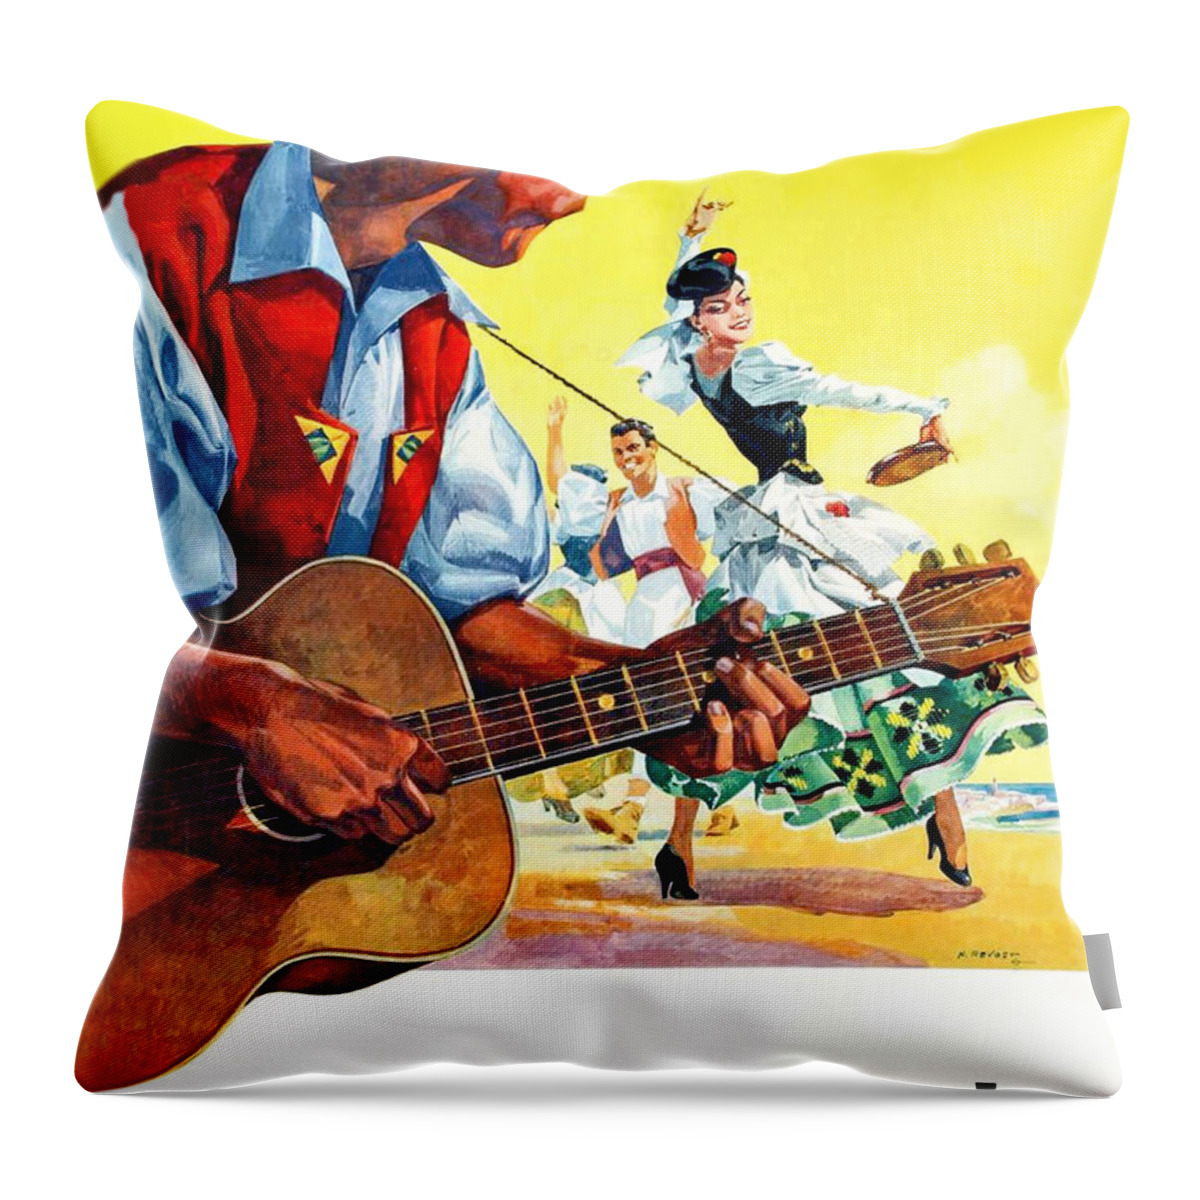 Canary Islands Throw Pillow featuring the digital art Canary Islands by Long Shot